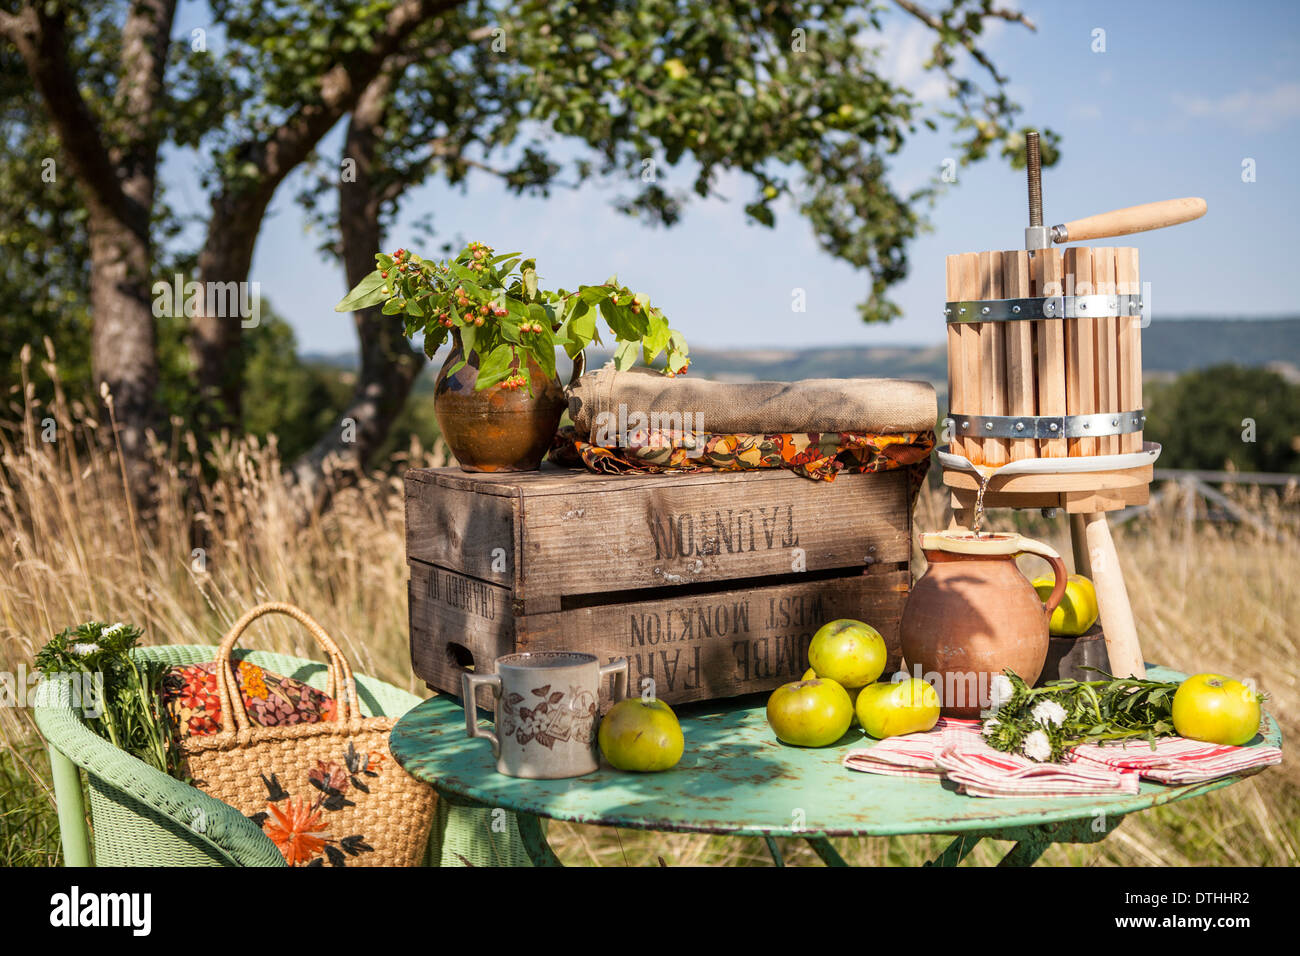 cider press on a table outdoors Stock Photo